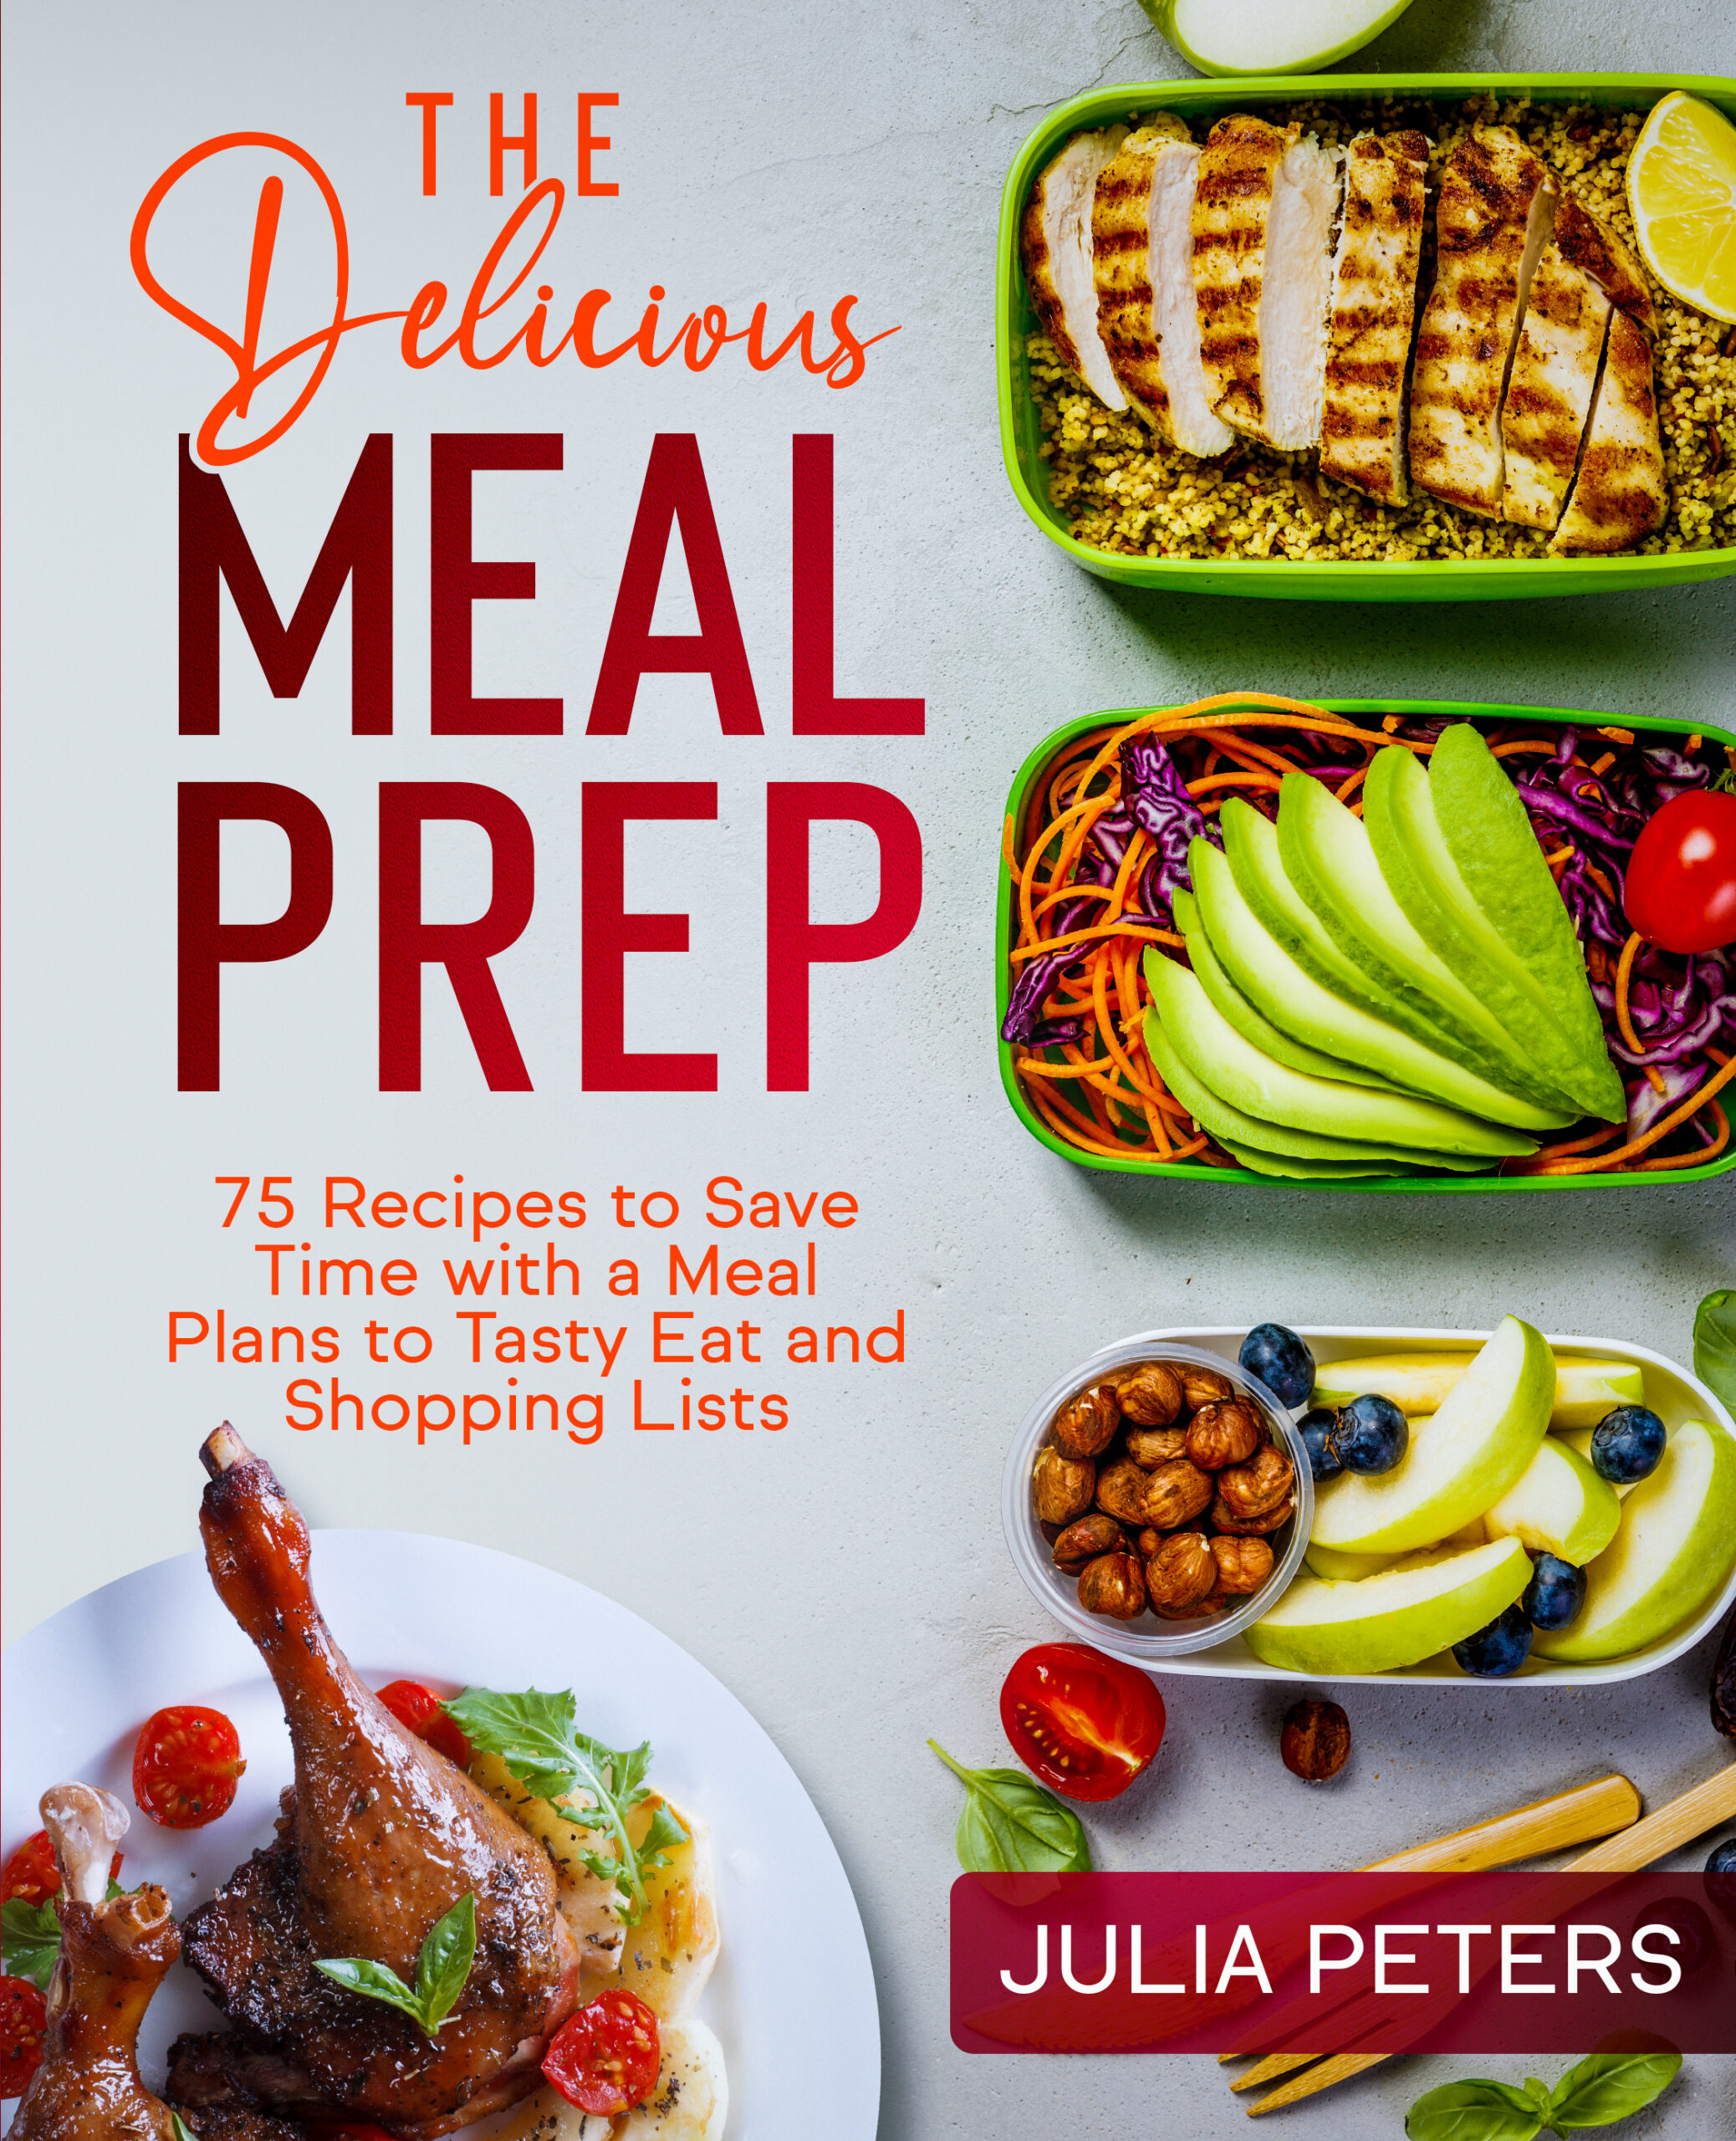 FREE: The Delicious Meal Prep: 75 Recipes to Save Time with a Meal Plans to Tasty Eat and Shopping Lists by Julia Peters